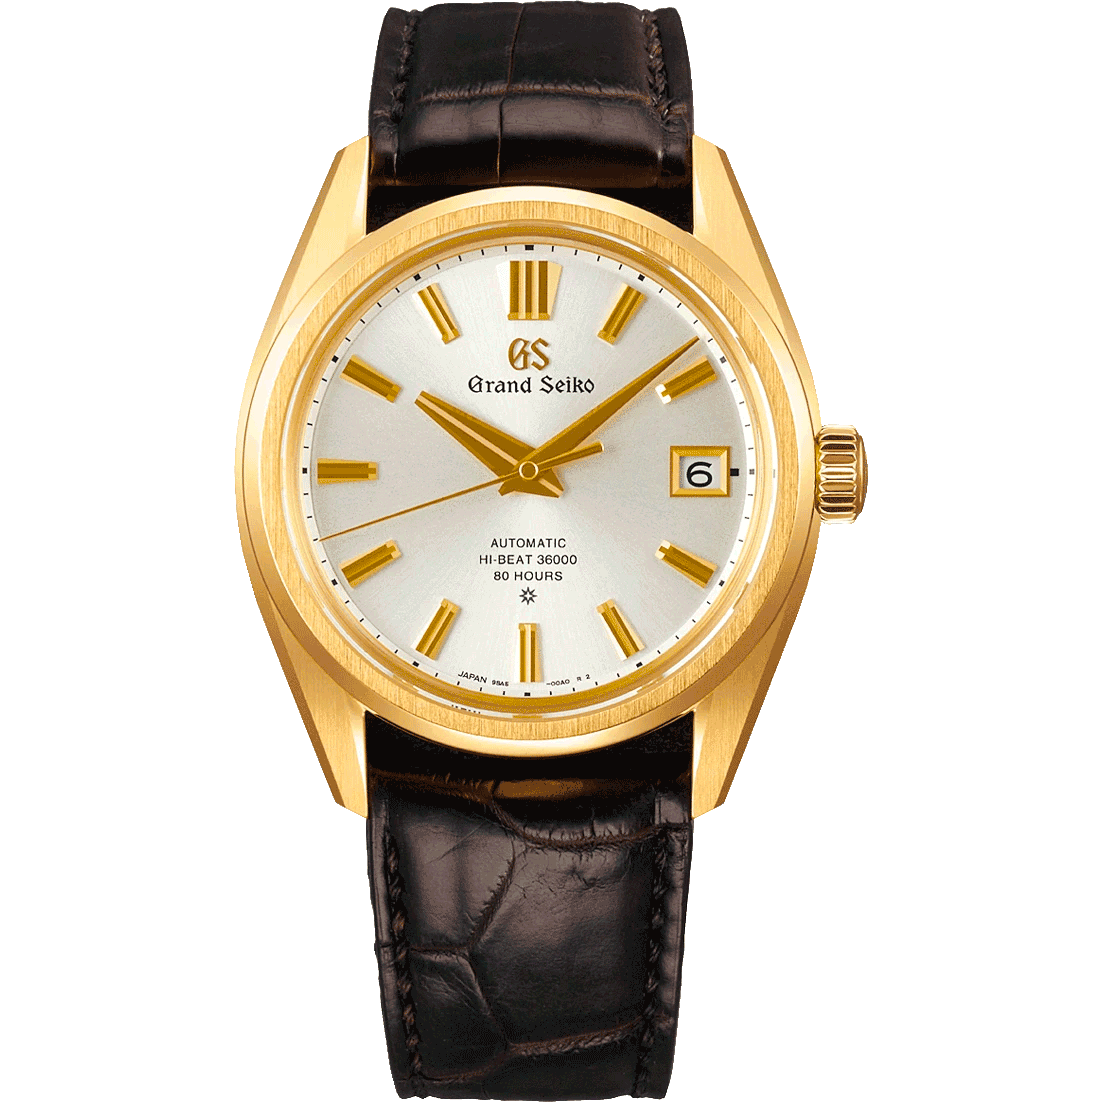 Grand Hi-Beat 36000 80 Hours SLGH002 Gold Watch Grand Seiko Official Boutique